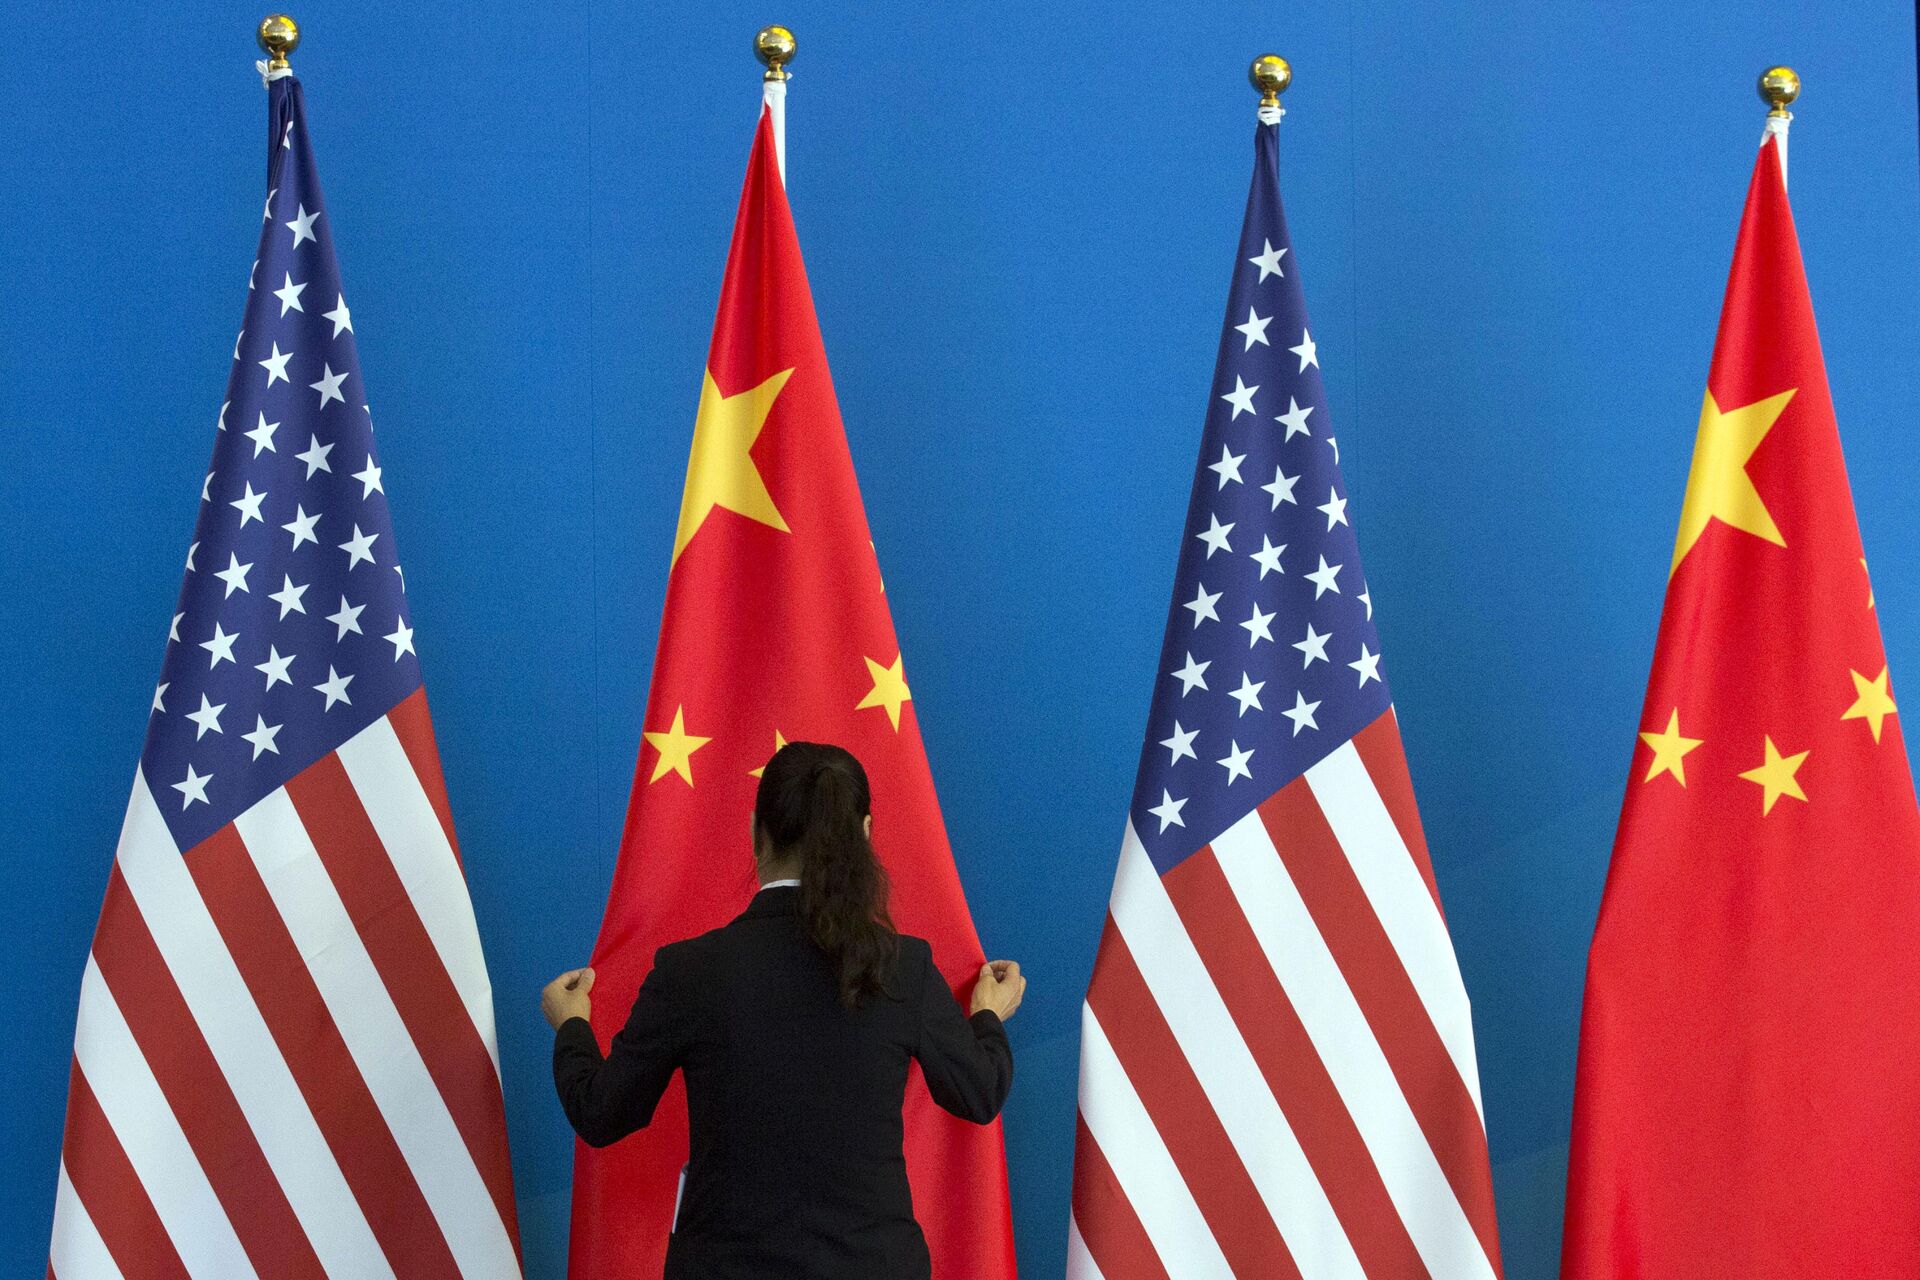 A Chinese woman adjusts the Chinese national flag near U.S. national flags before a Strategic Dialogue expanded meeting that's part of the U.S.-China Strategic and Economic Dialogue at the Diaoyutai State Guesthouse in Beijing, Thursday, July 10, 2014 - Sputnik International, 1920, 14.11.2022